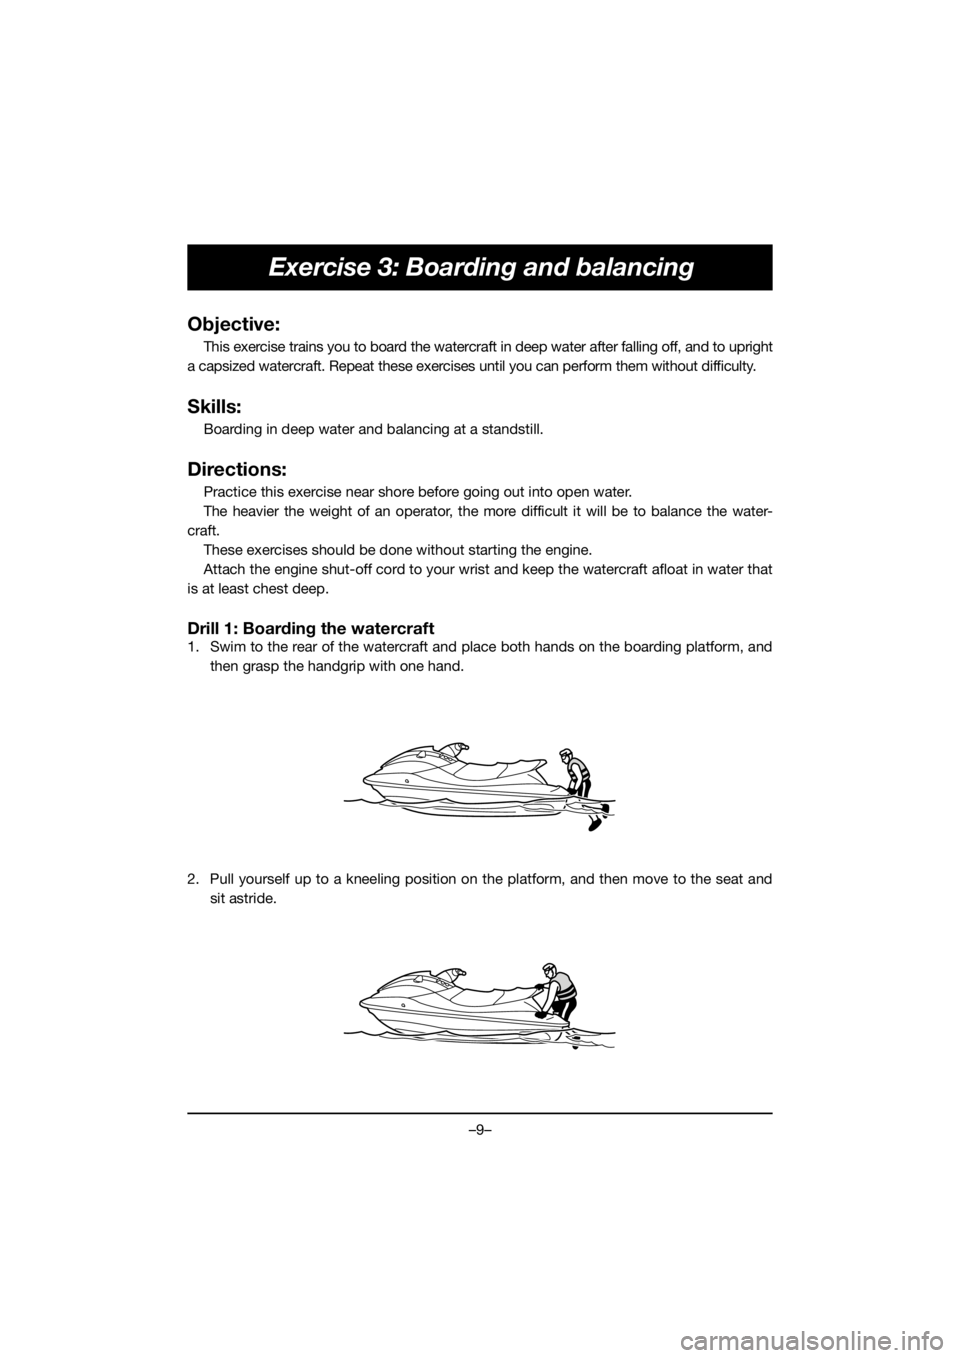 YAMAHA VX CRUISER HO 2019  Betriebsanleitungen (in German) –9–
Exercise 3: Boarding and balancing
Objective:
This exercise trains you to board the watercraft in deep water after falling off, and to upright
a capsized watercraft. Repeat these exercises unt